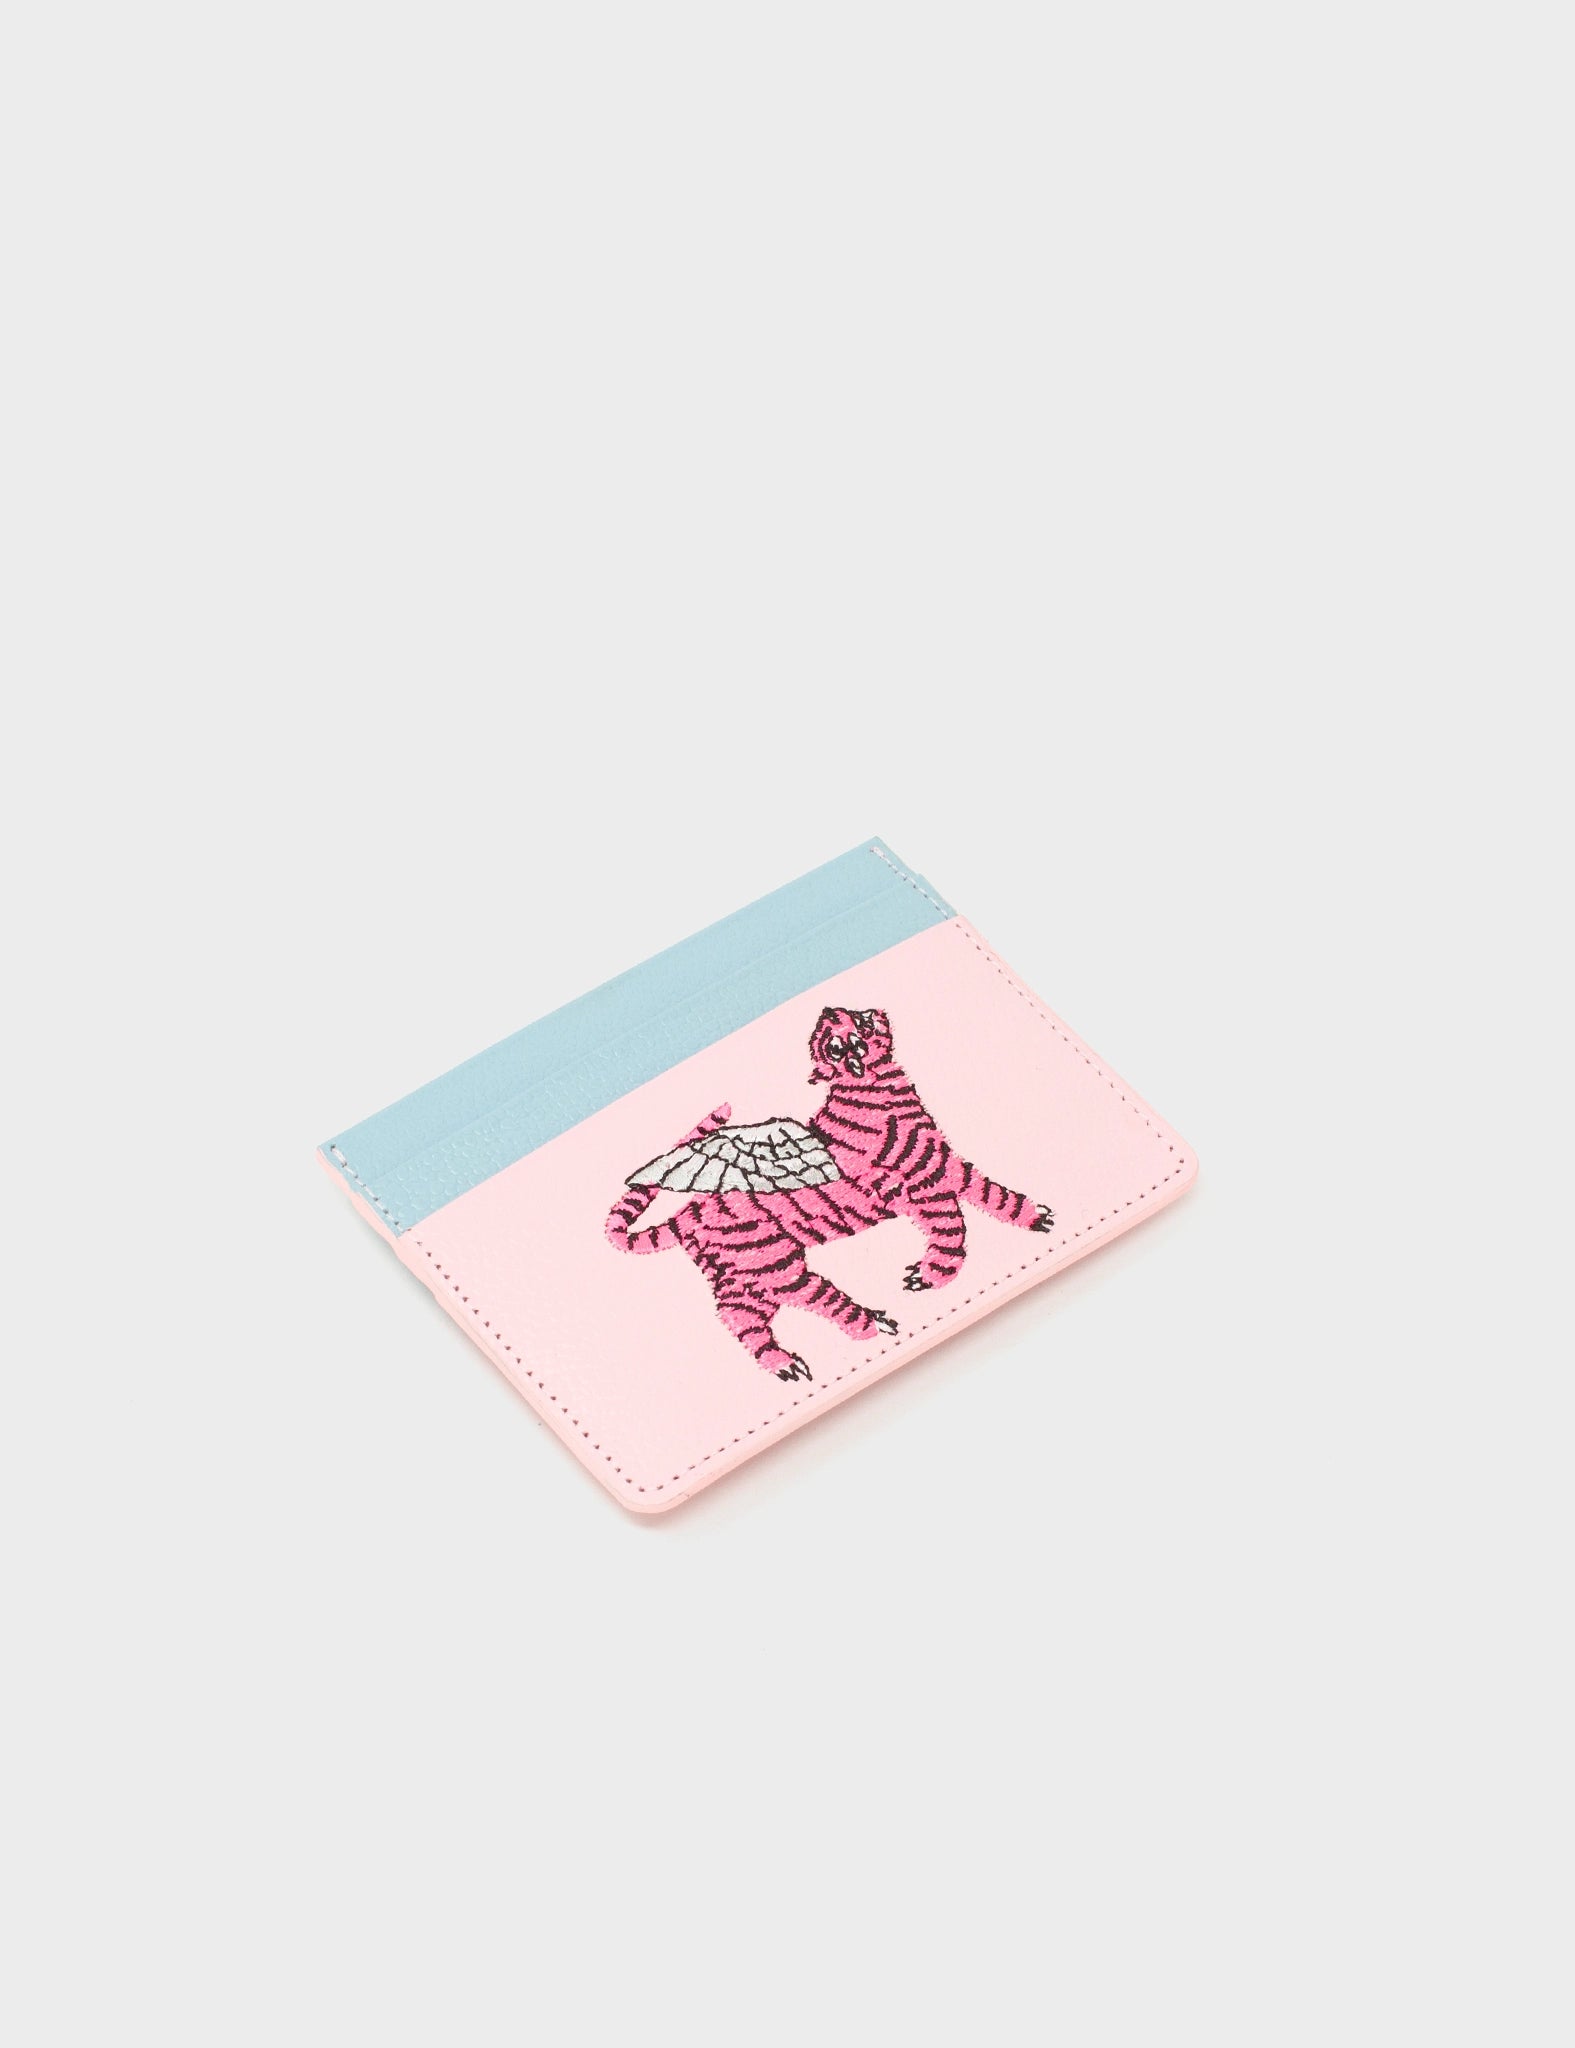 Parfait Pink And Stratosphere Blue Leather Cardholder - Tiger with Wings Embroidery  - Side 